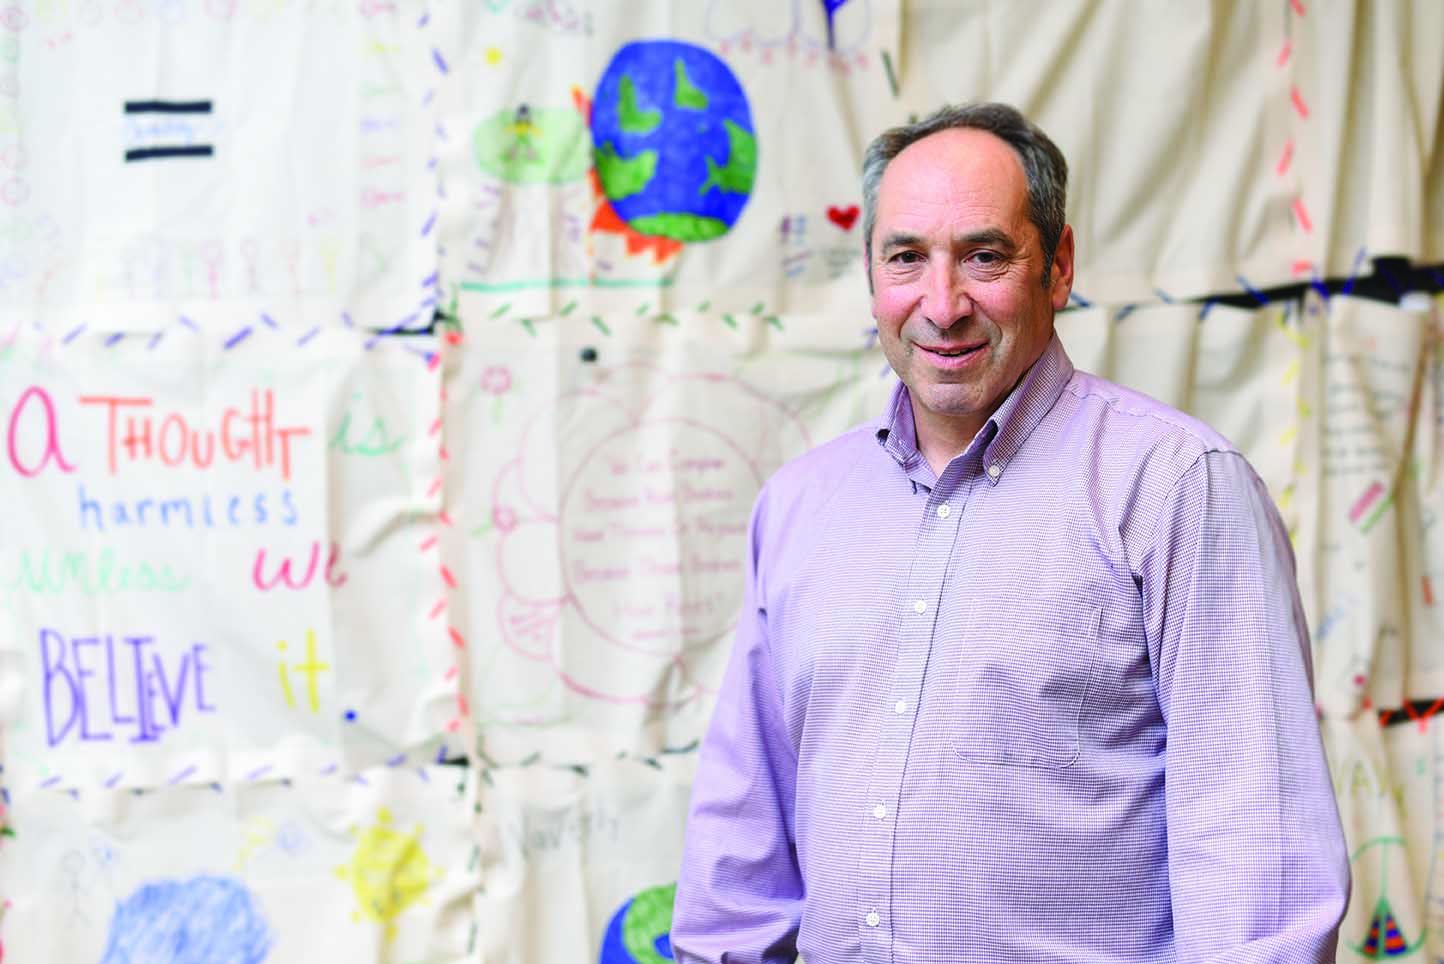 Robert Lurie stands in front of a white backdrop with hand-painted words.